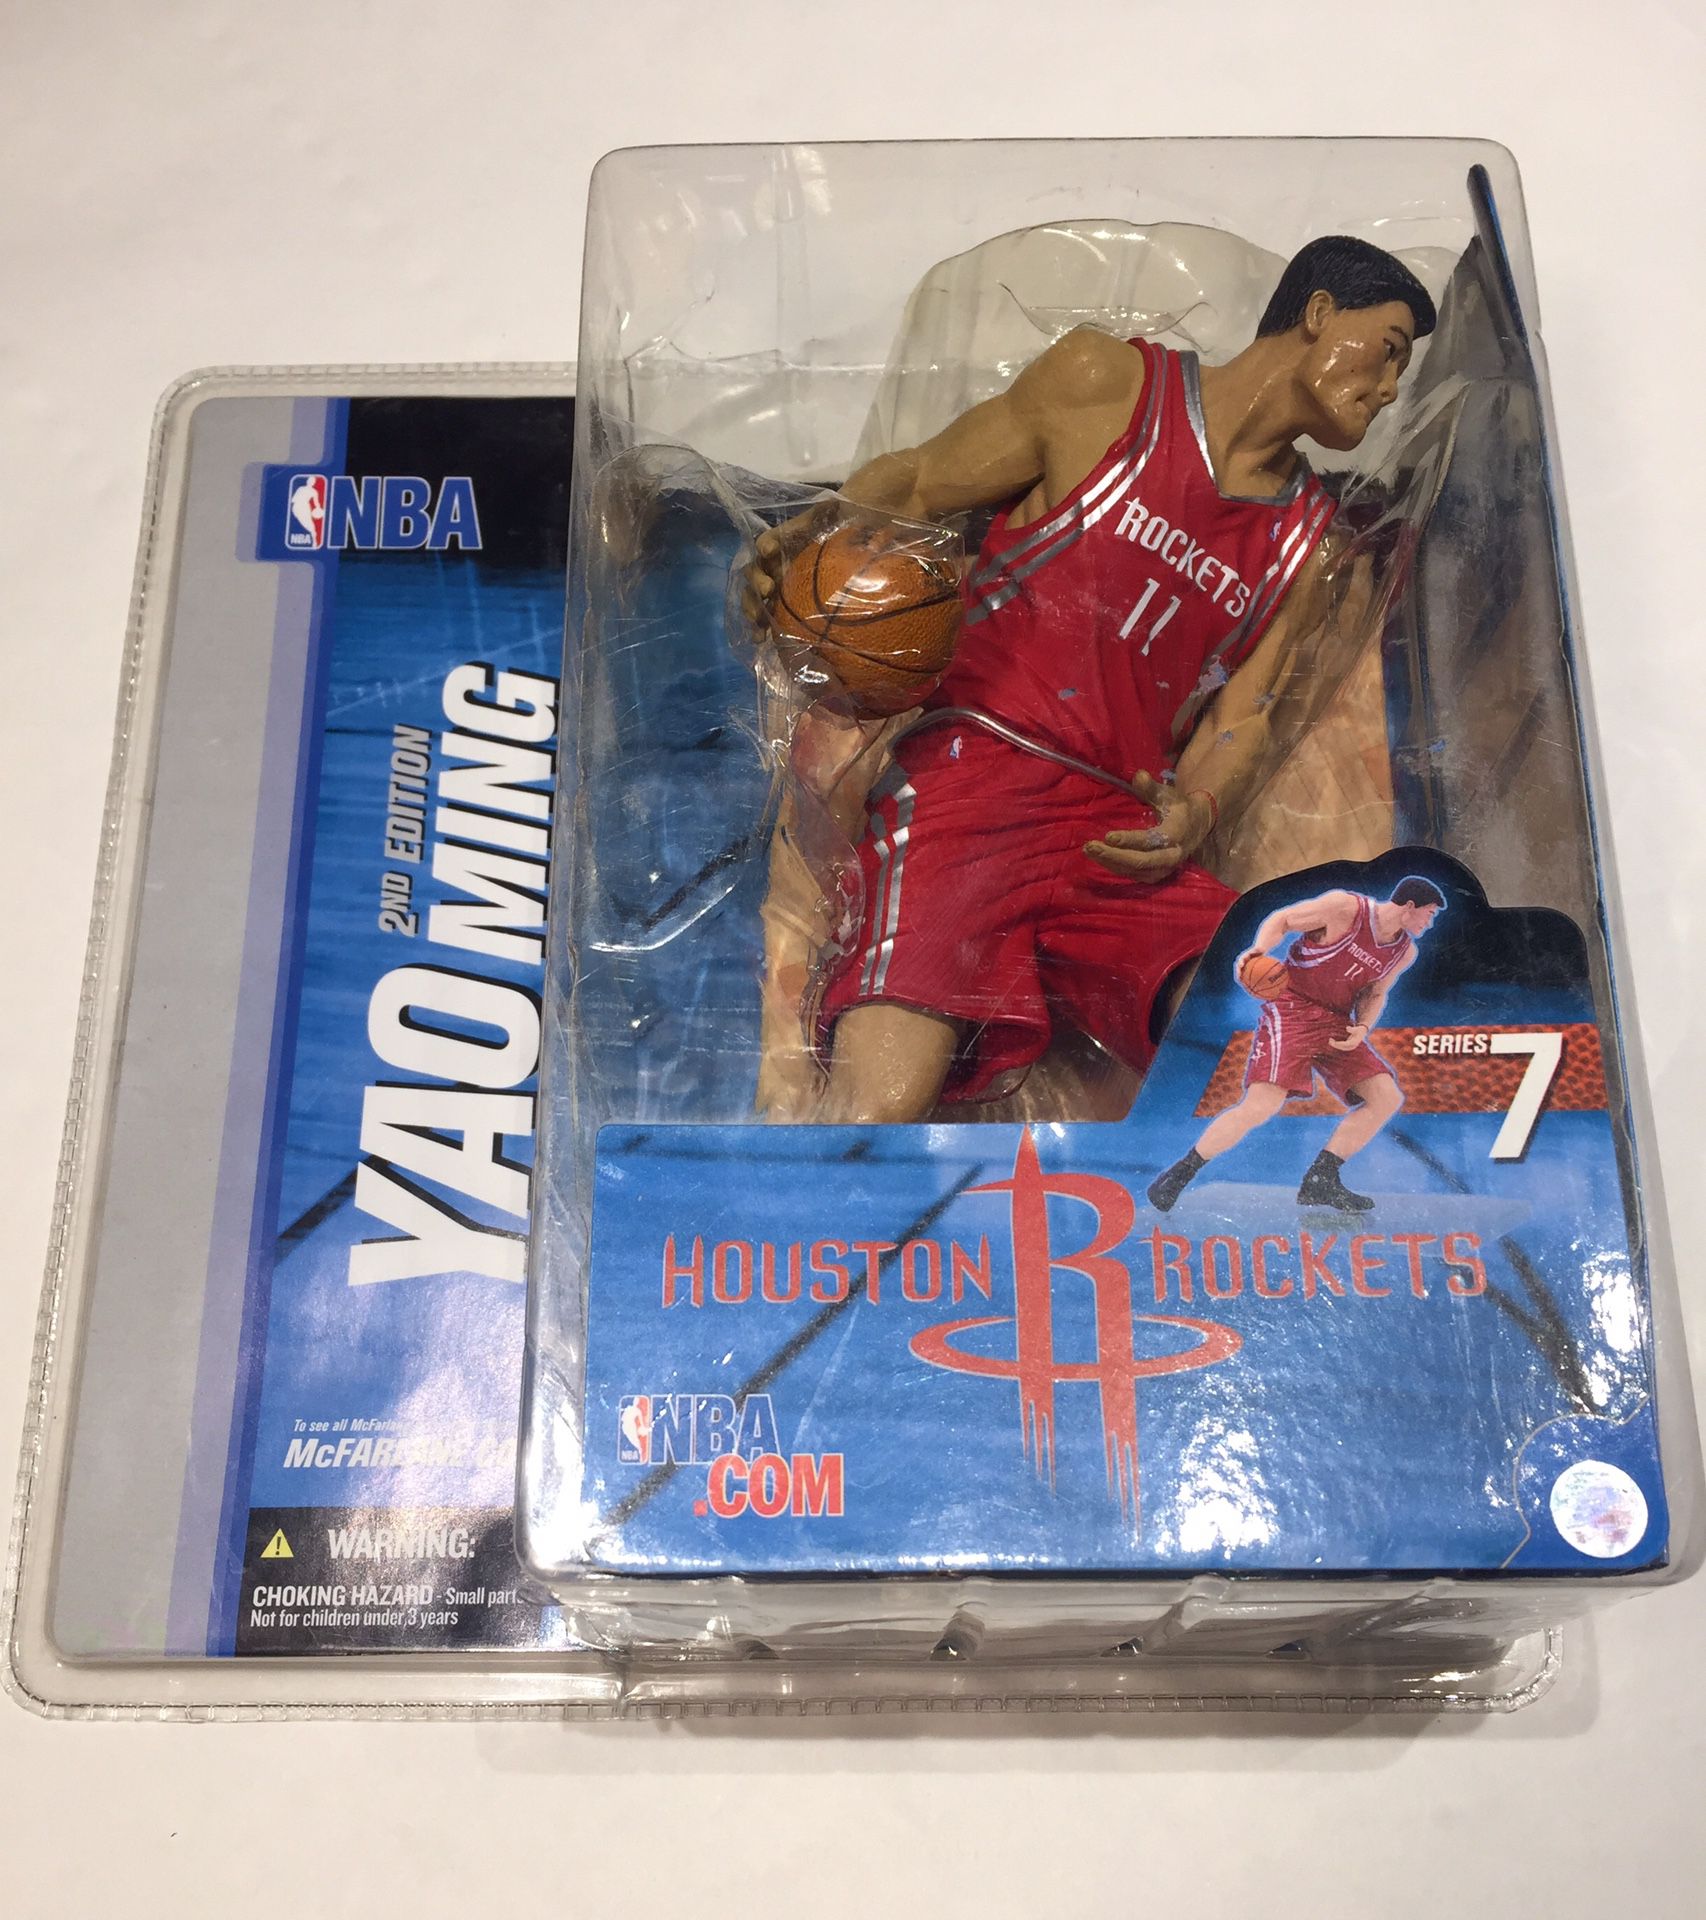 BRAND NEW, Yao Ming Houston Rockets Figure, NBA, Mcfarlane Toys, Perfect for Collectors